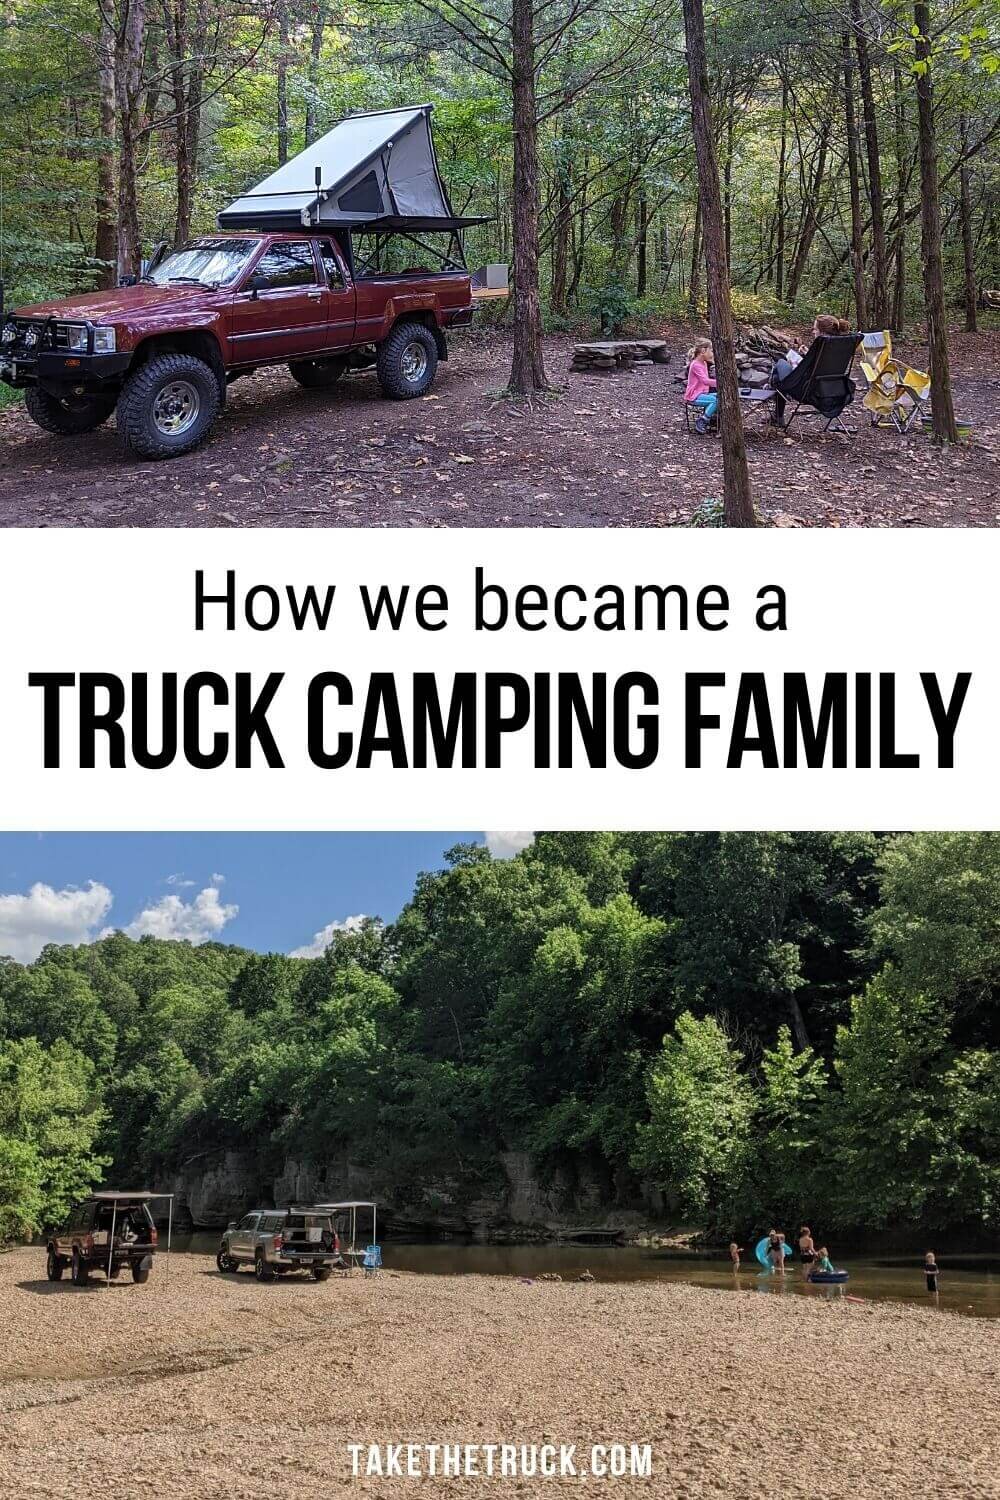 Overlanding with kids and truck bed camping as a family is a fun way to explore together and bond! Read to hear this overlanding family’s transition from RVing to truck camping.